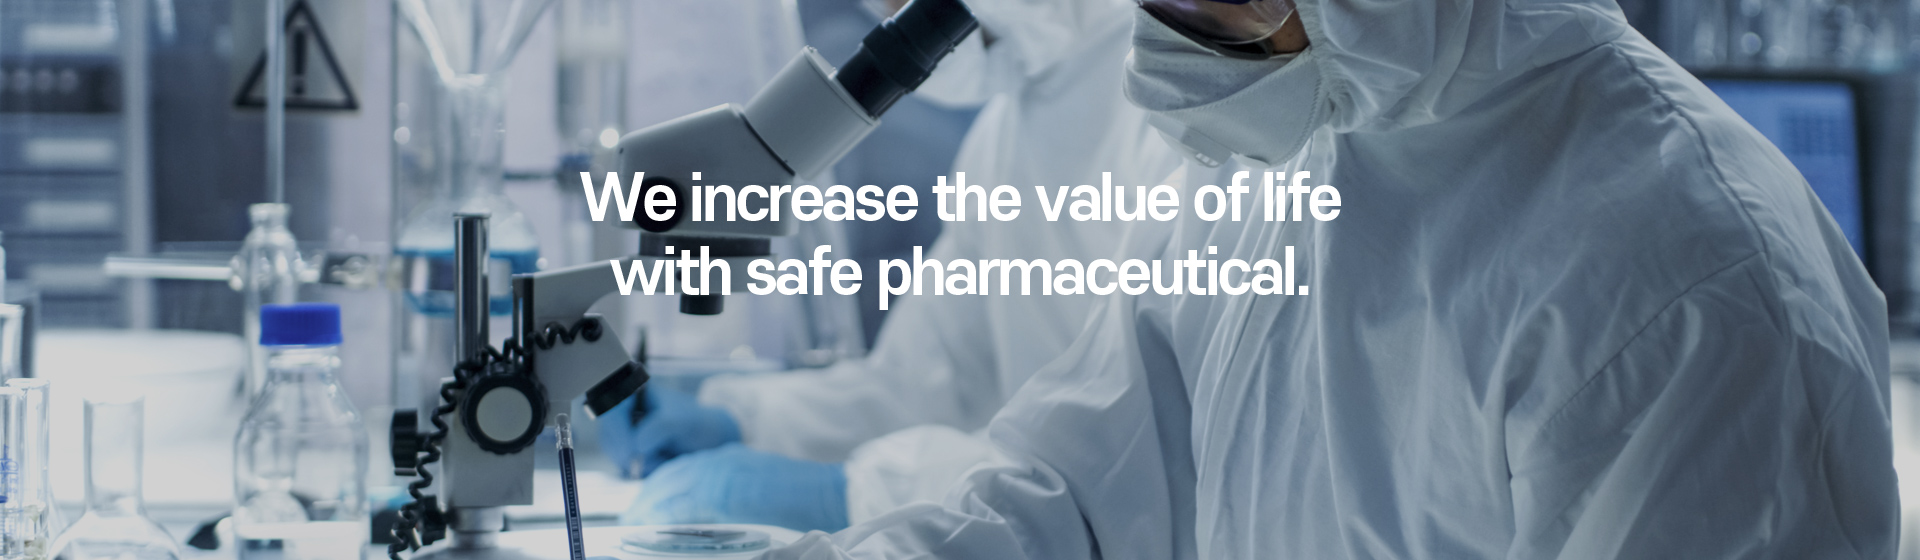 we increase the value of life with safe pharmaceutical